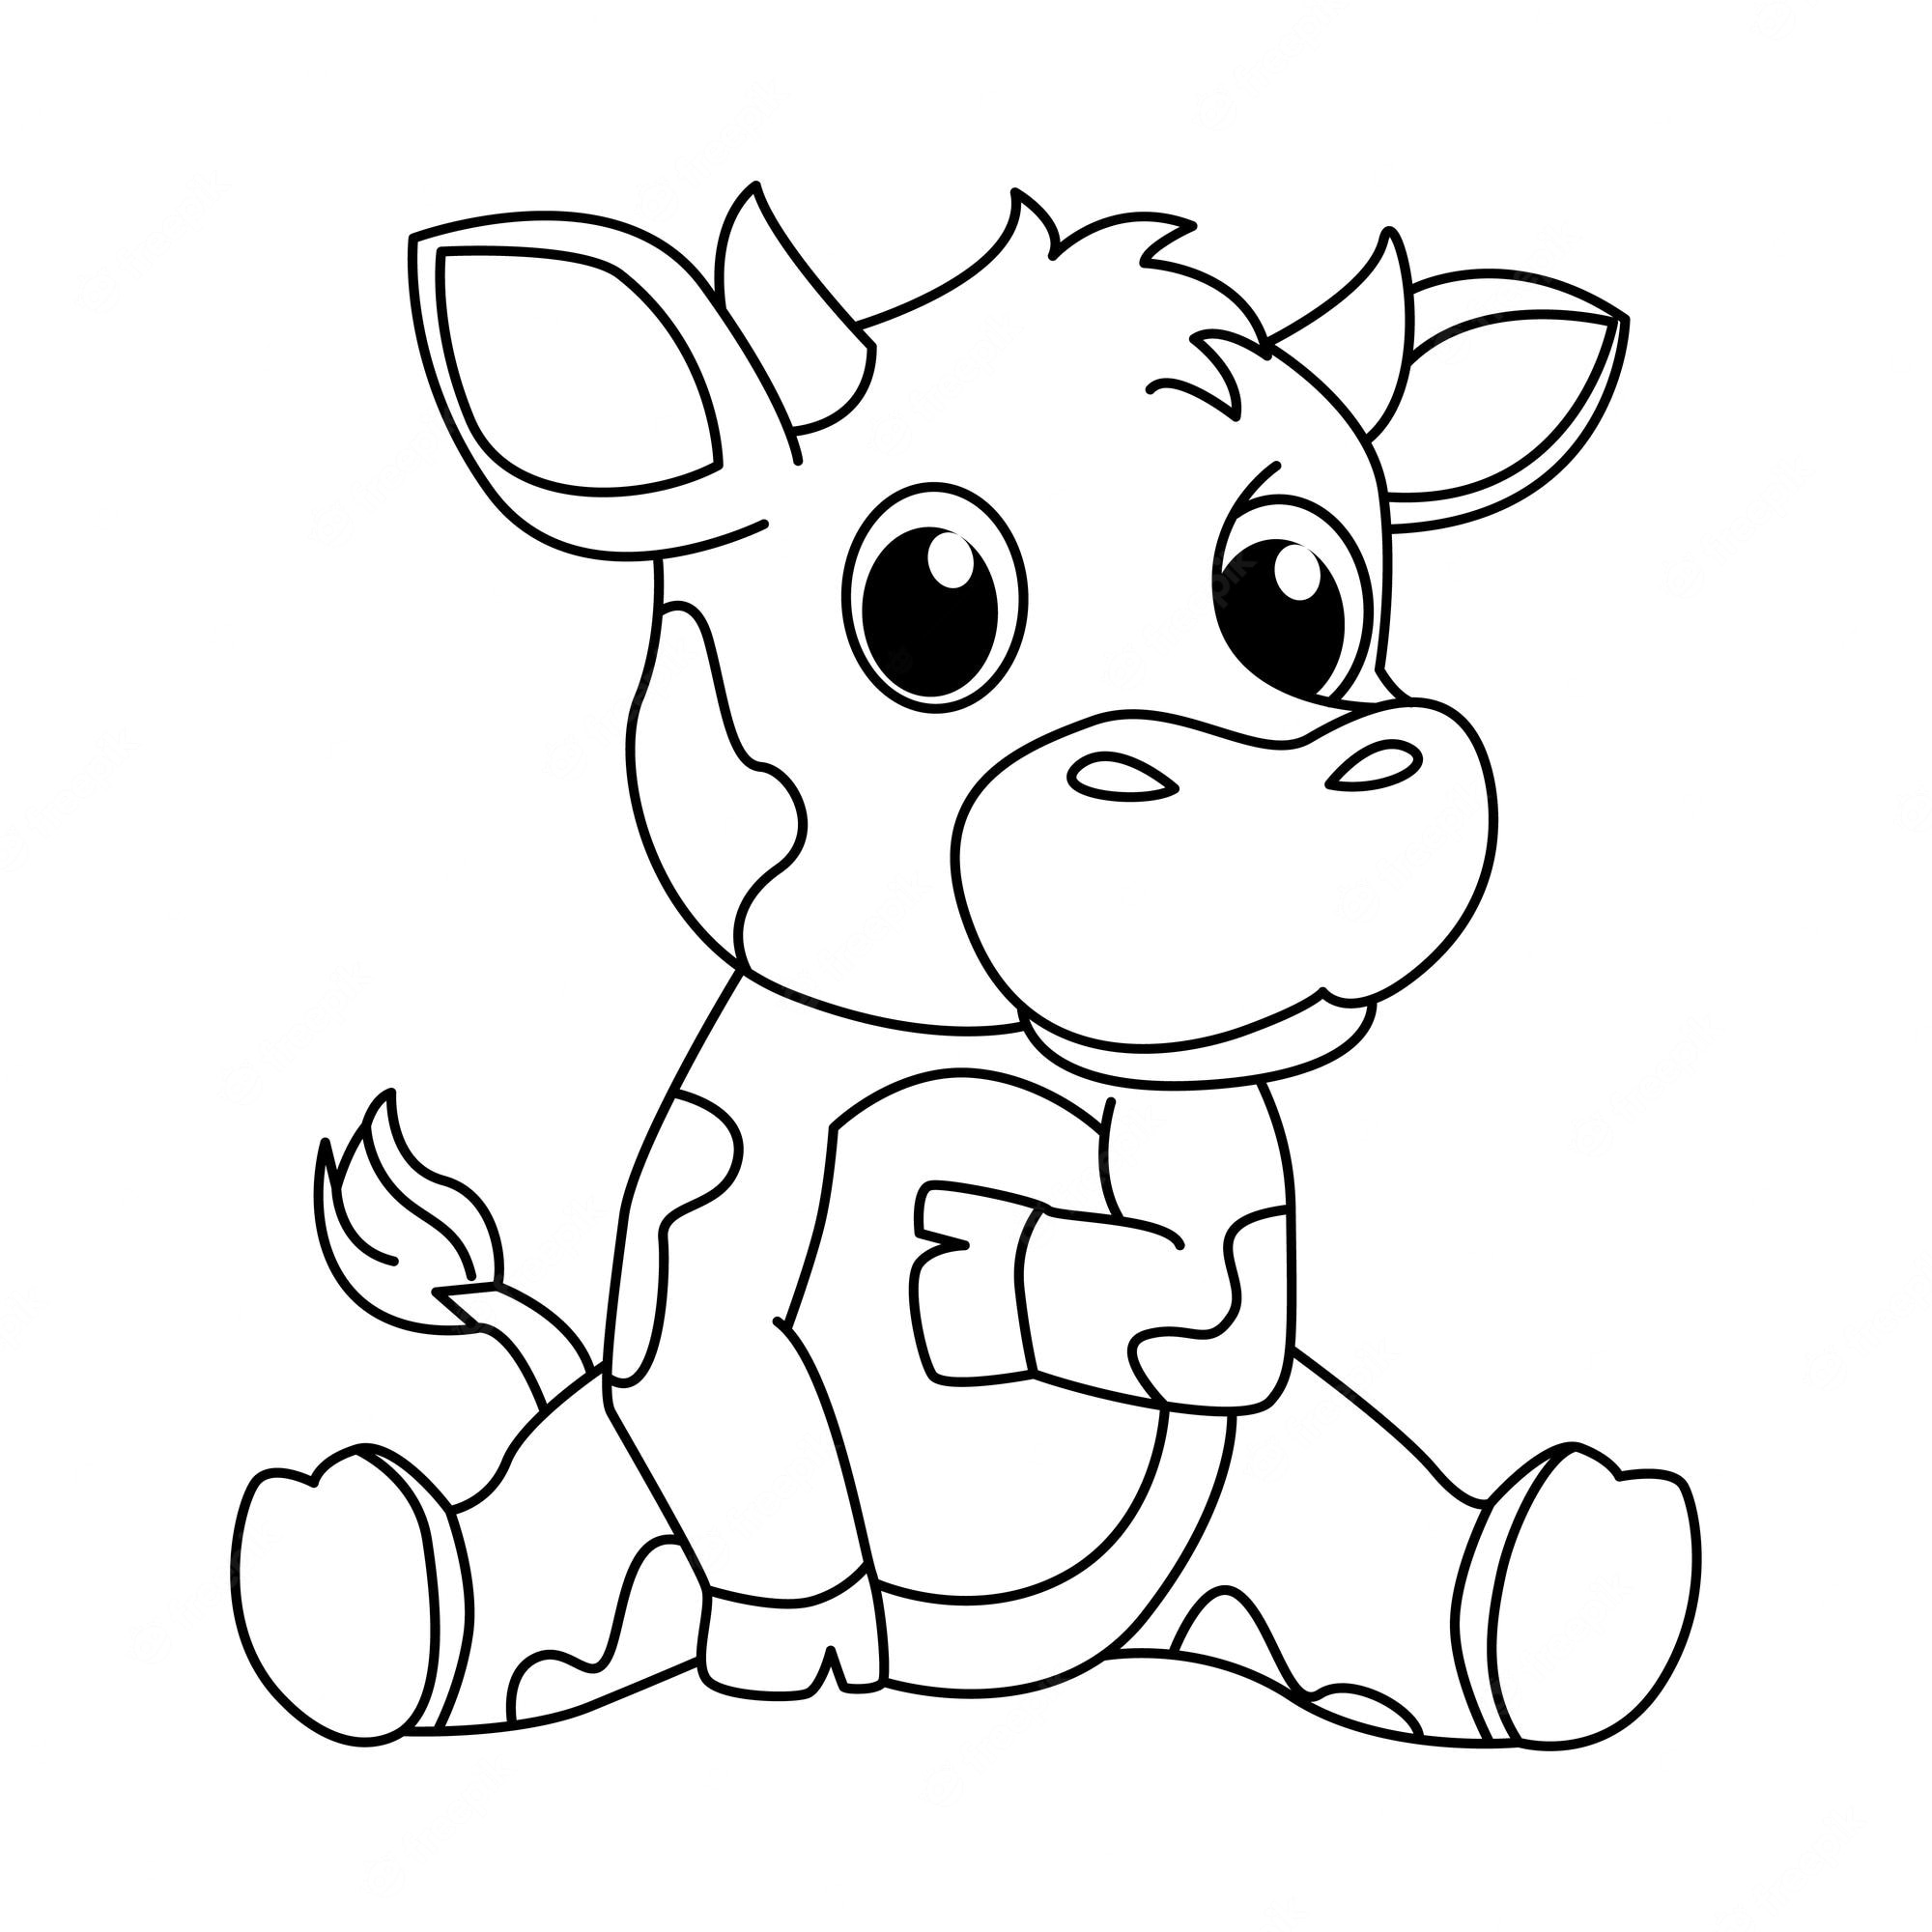 Premium Vector | Cute cow cartoon coloring page illustration vector for  kids coloring book